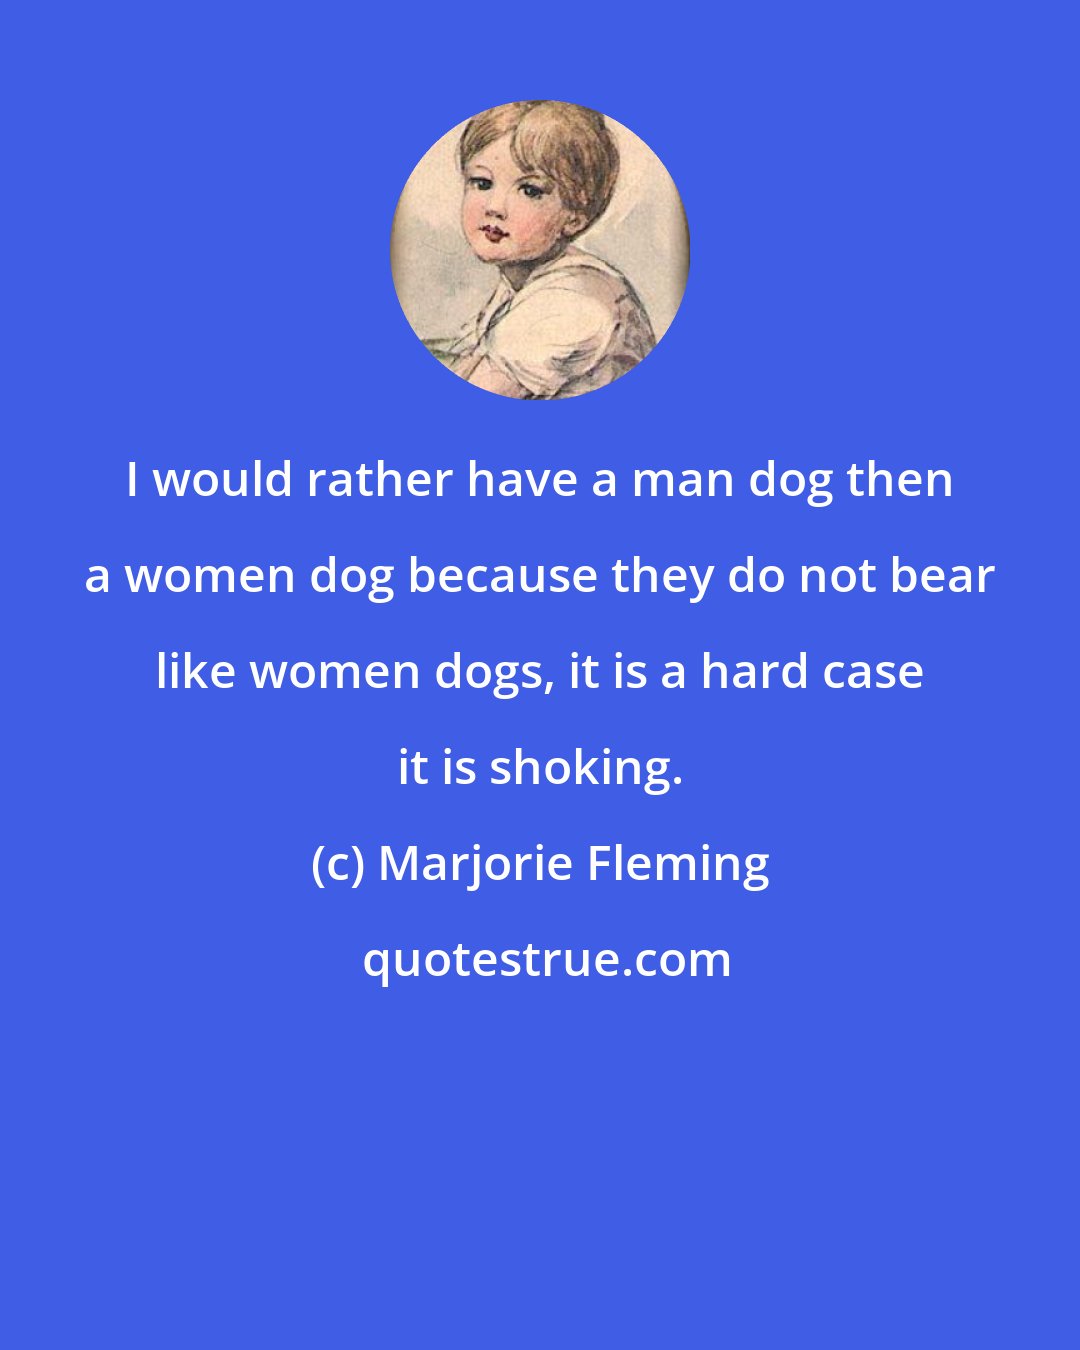 Marjorie Fleming: I would rather have a man dog then a women dog because they do not bear like women dogs, it is a hard case it is shoking.